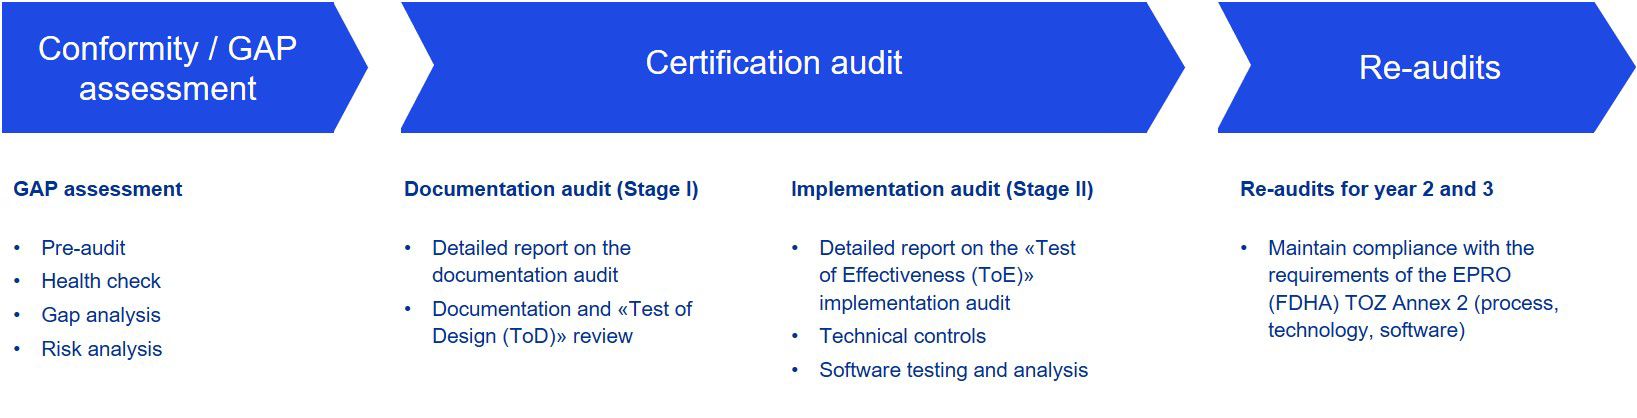 Graphic: Our approach to certification audits